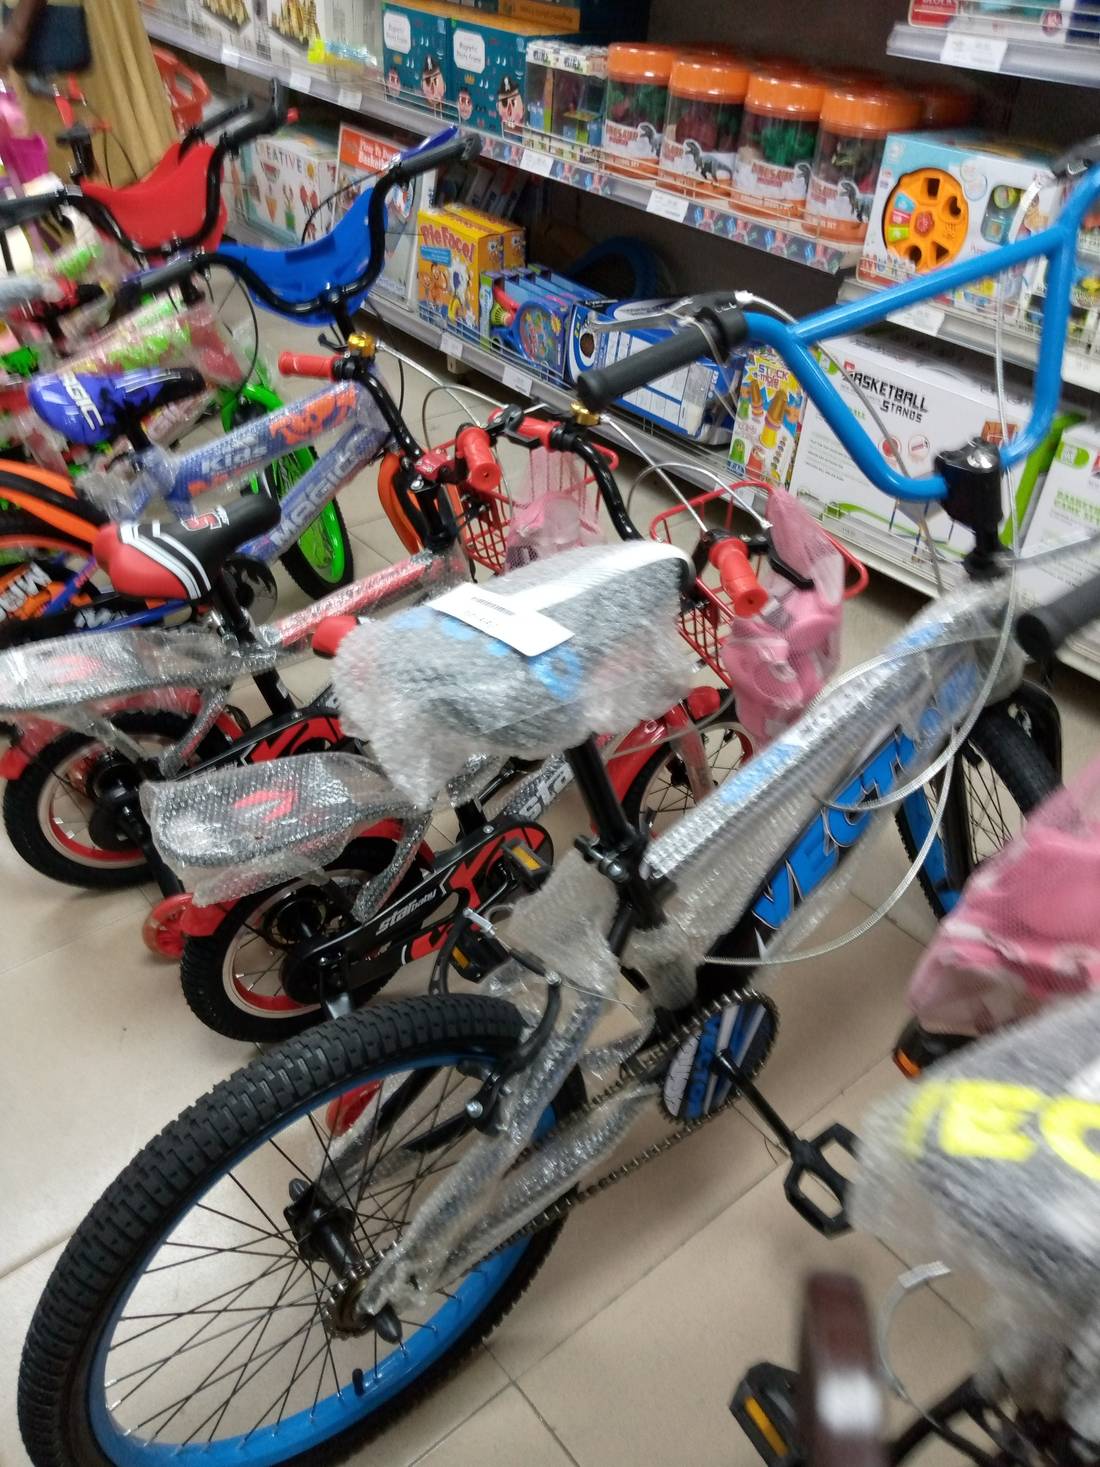 Bicycles packed @ the display in Melcom shop